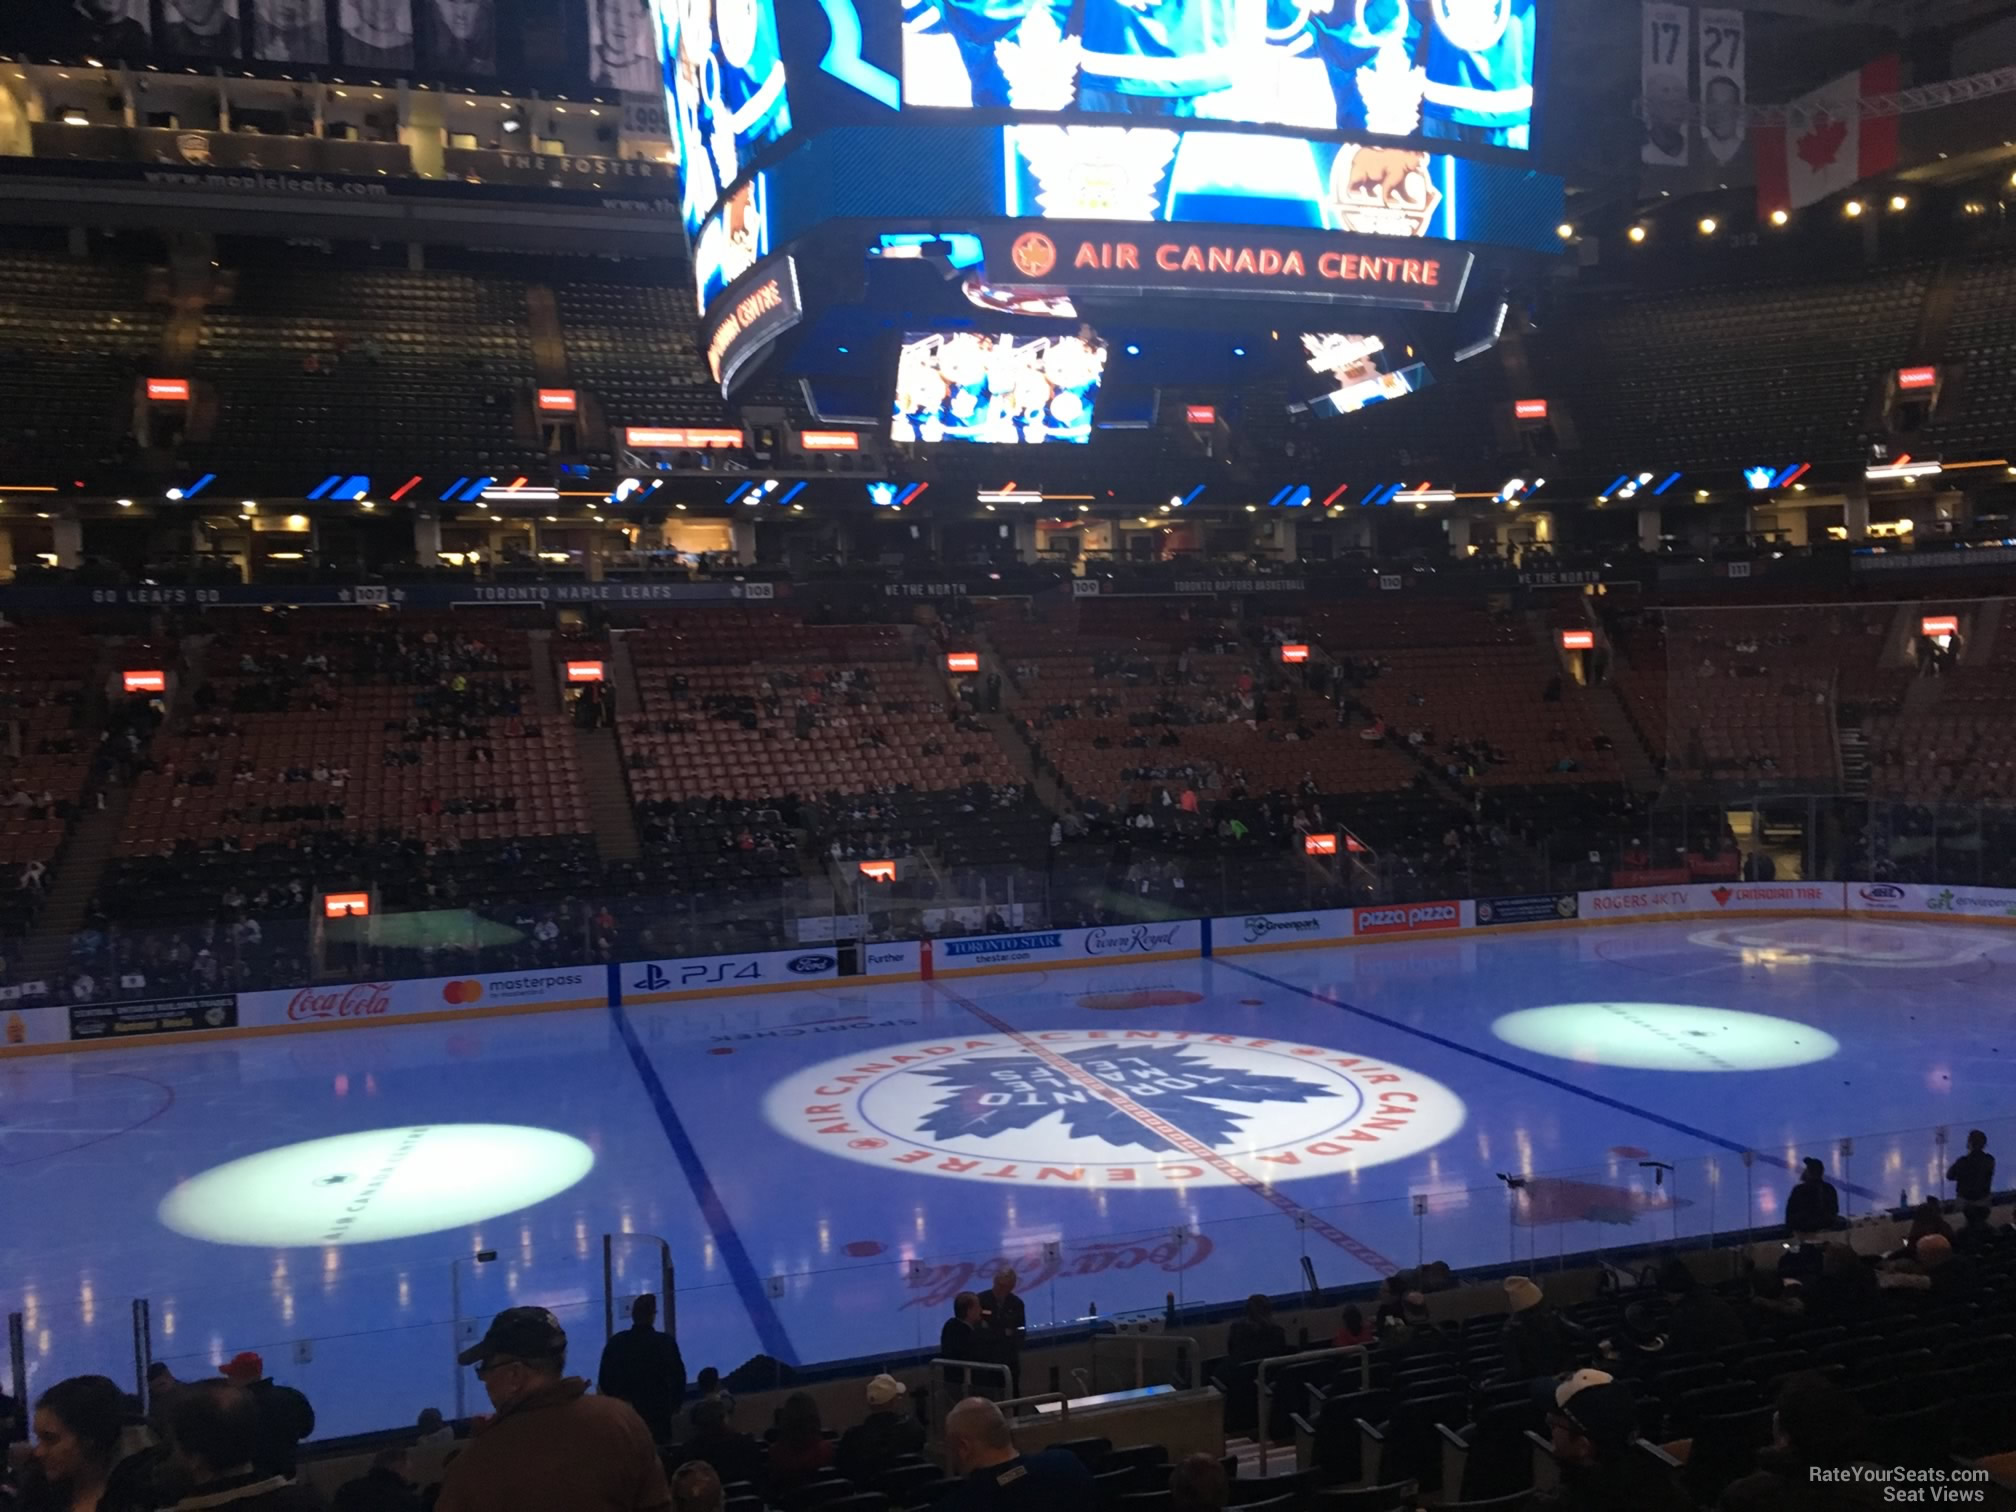 section 120, row 20 seat view  for hockey - scotiabank arena